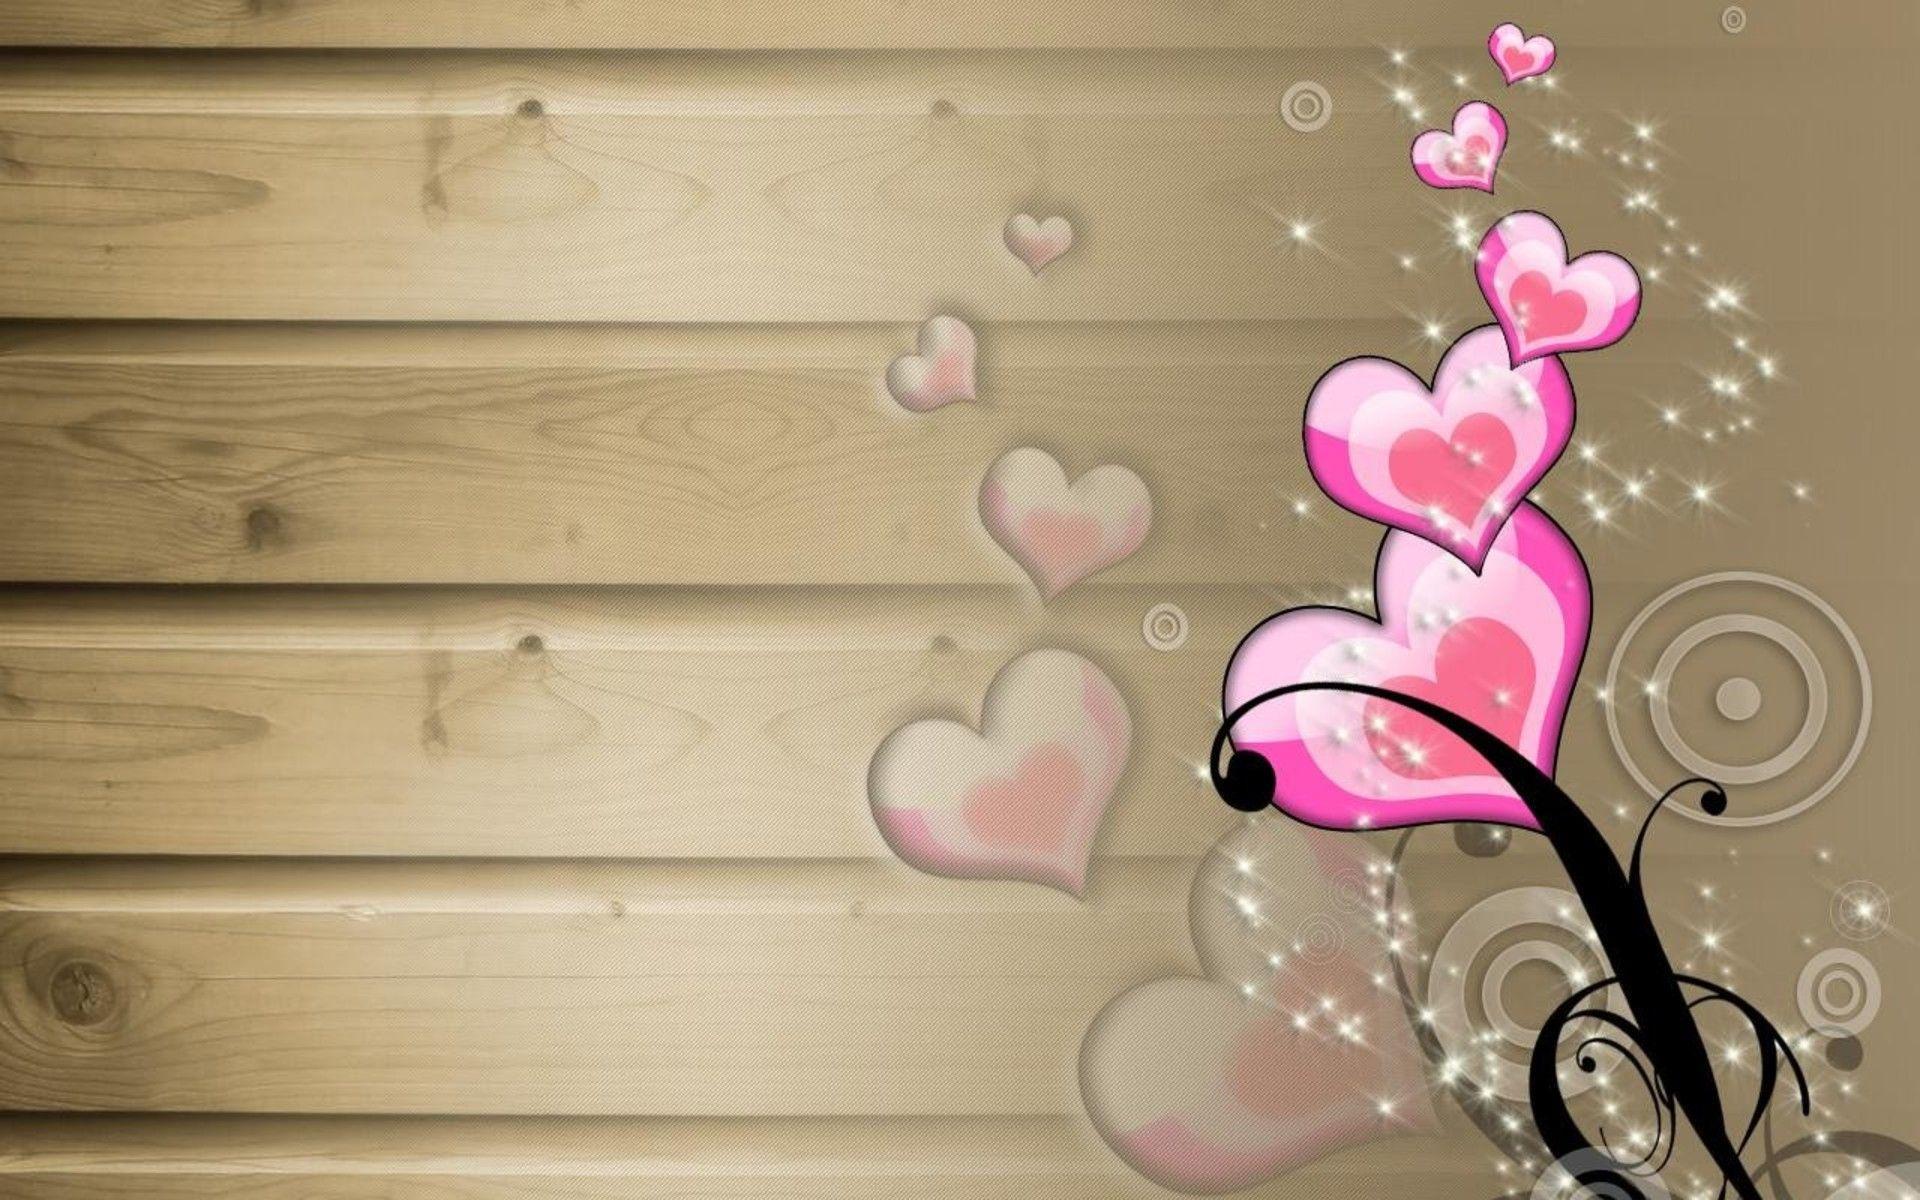 Abstract Love Art Wallpaper 02 Background